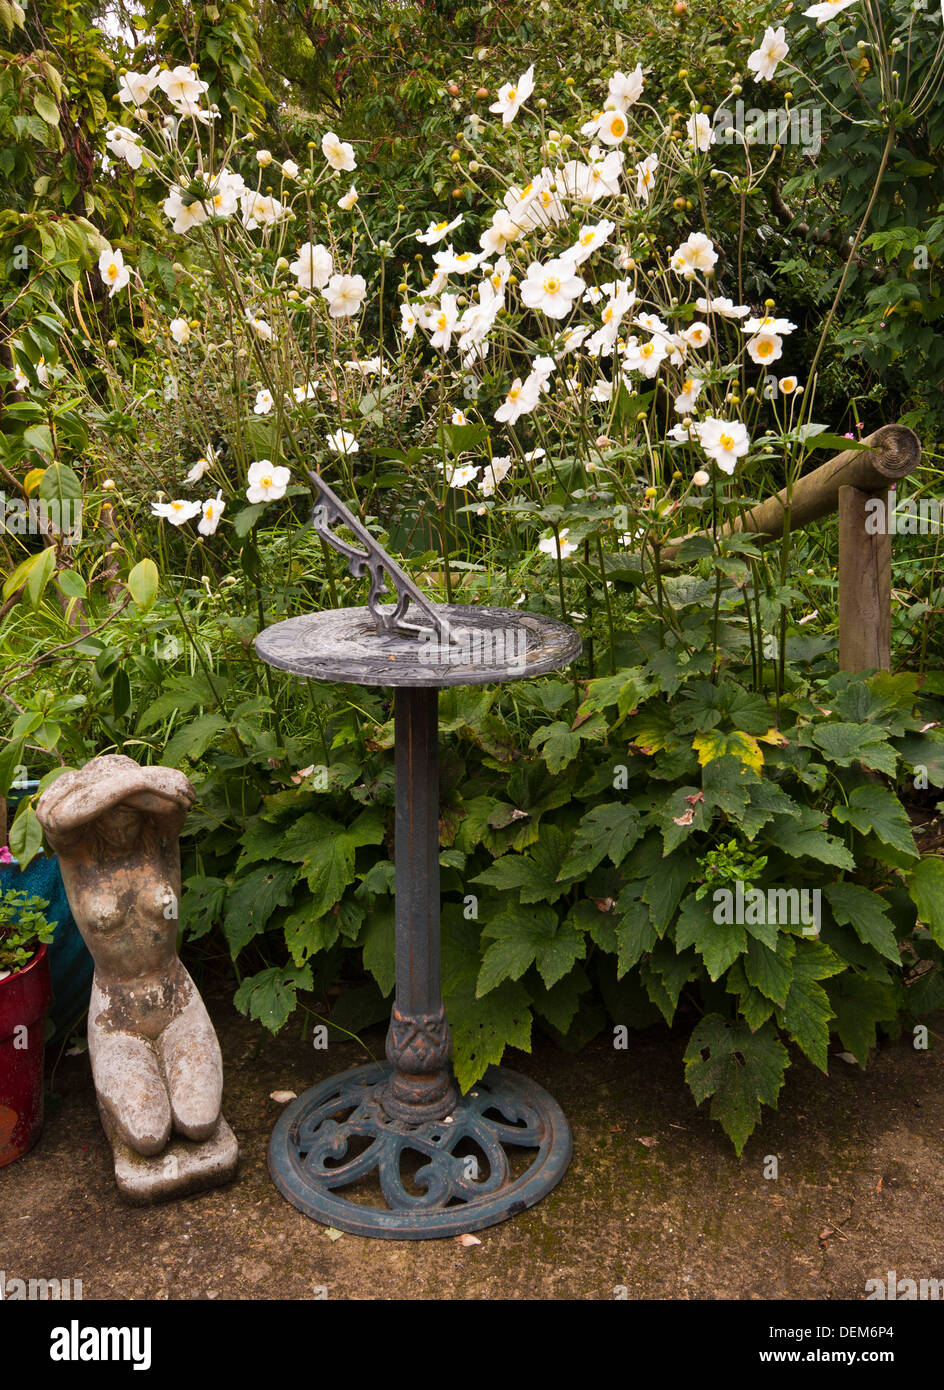 Sundial In a Cottage Garden With White Japanese Anemones Stock Photo